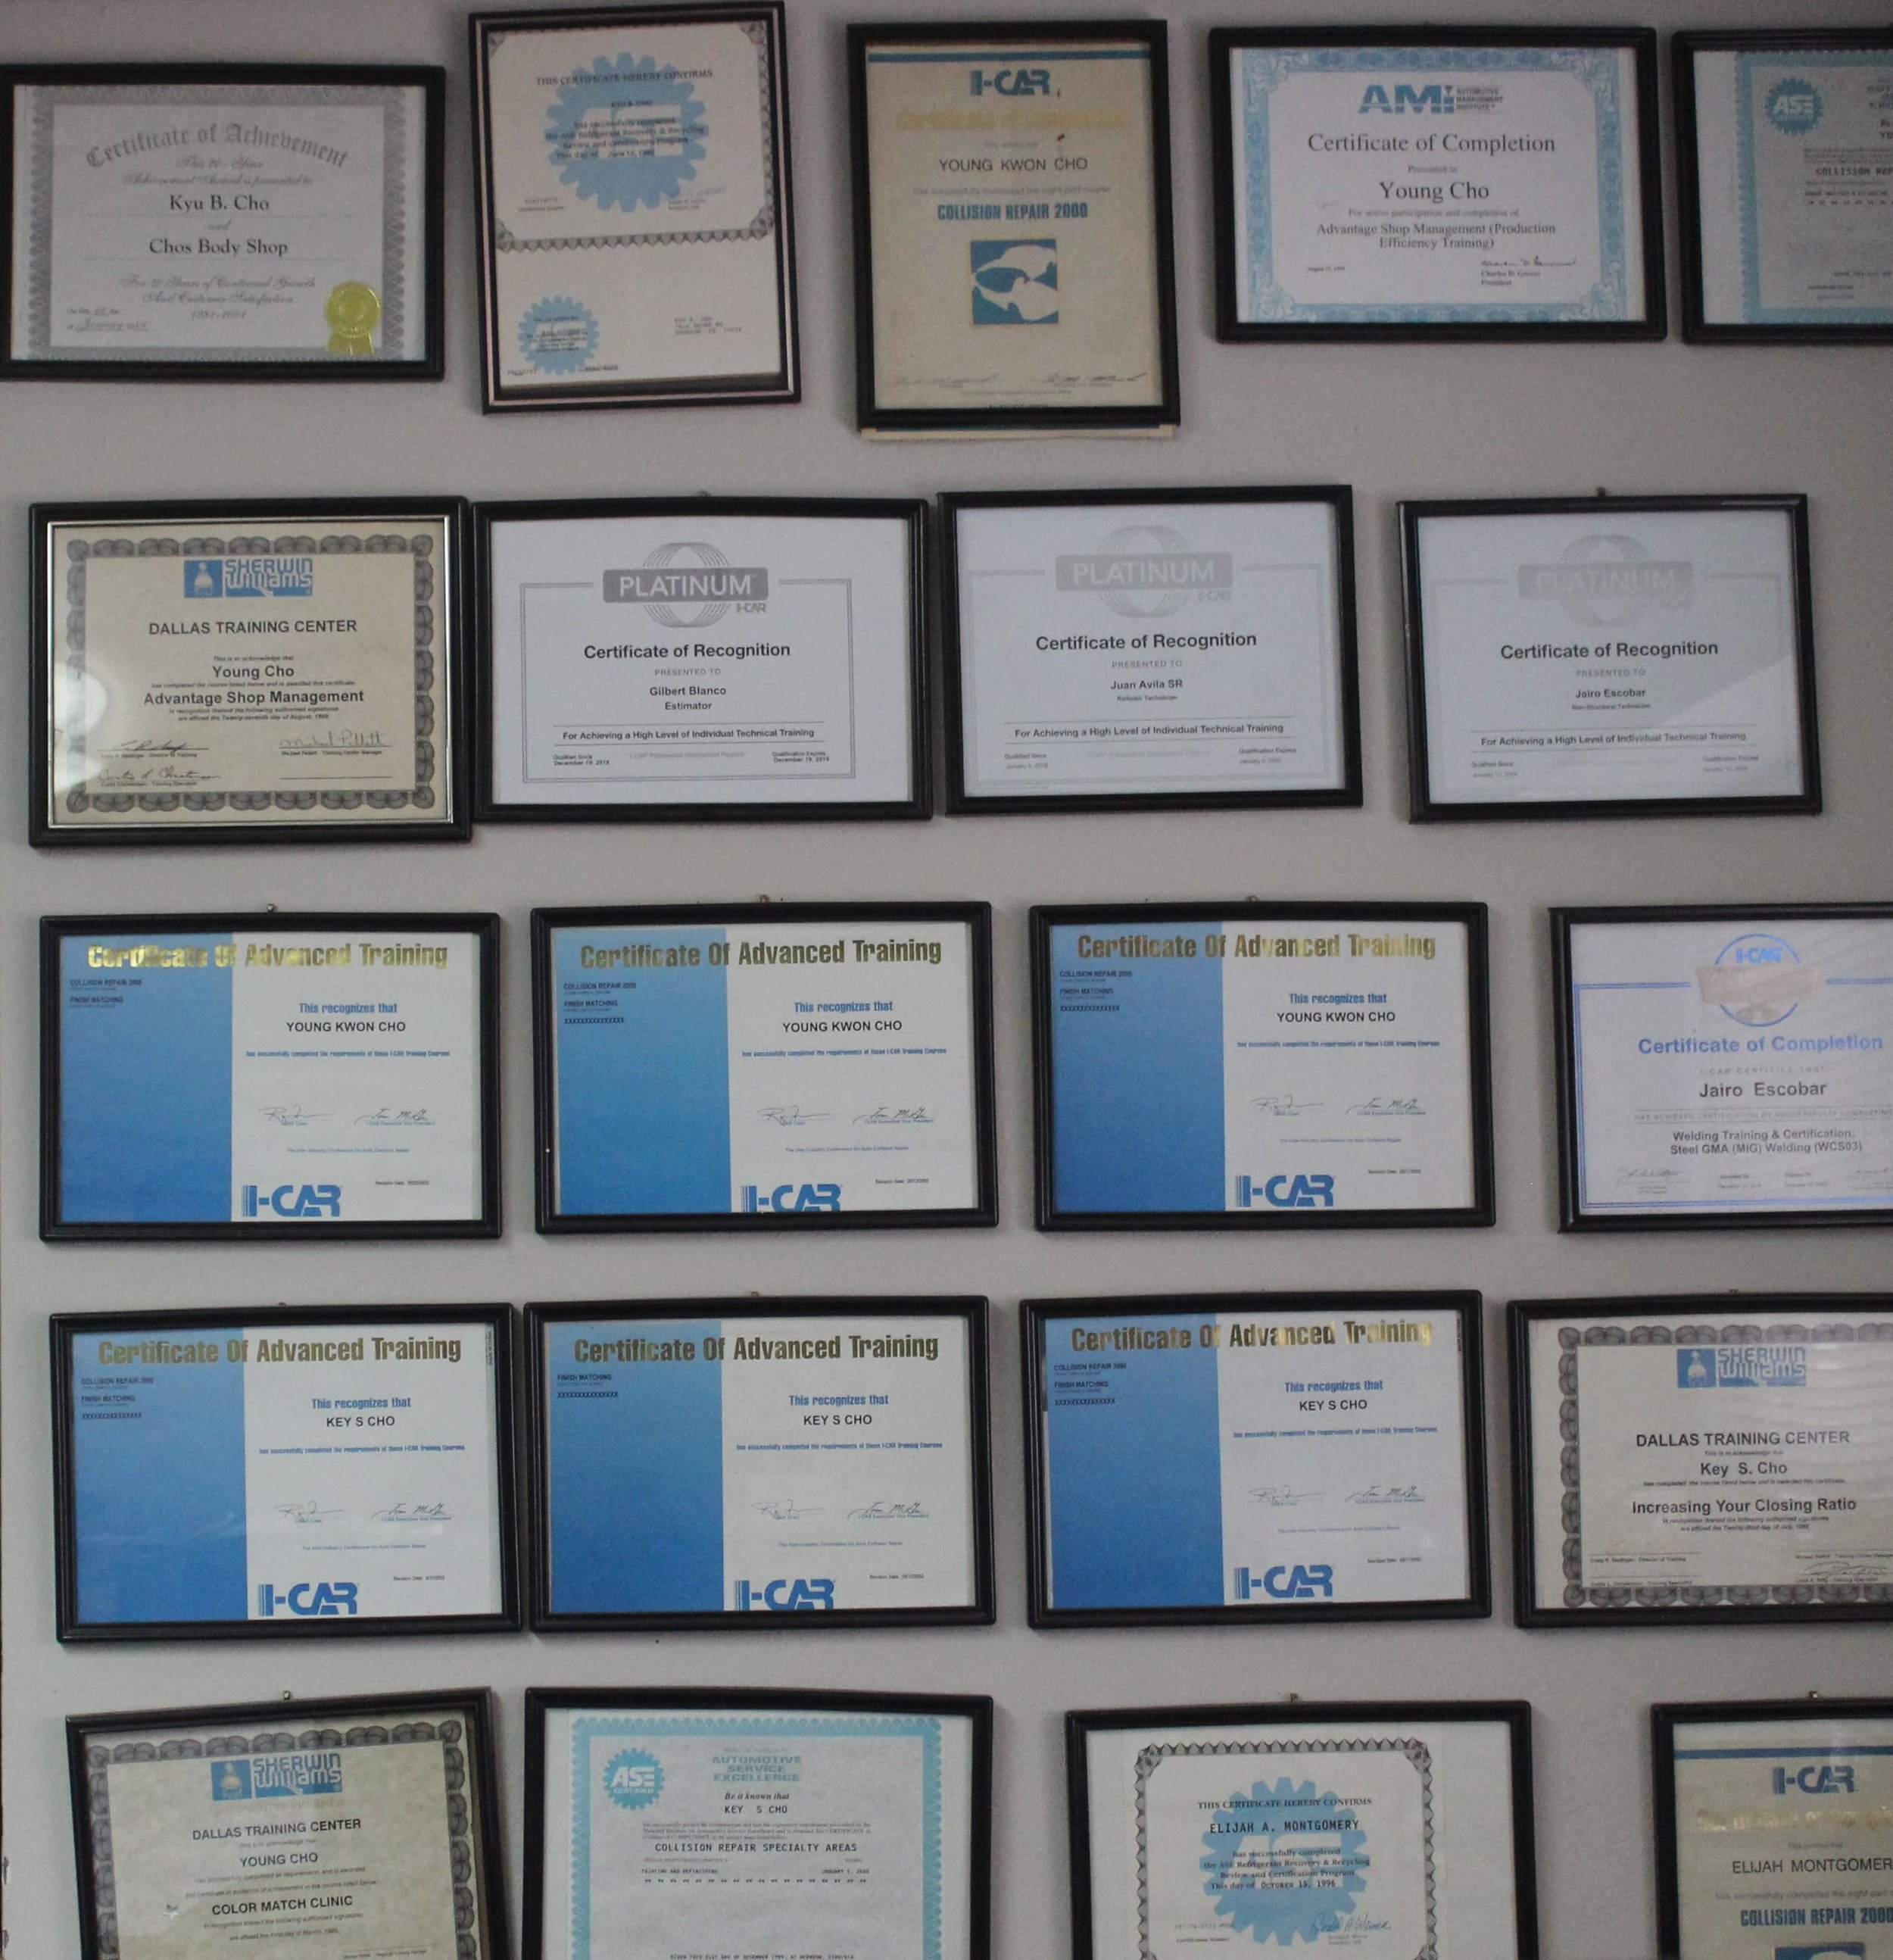 certificates for young cho body shop.JPG